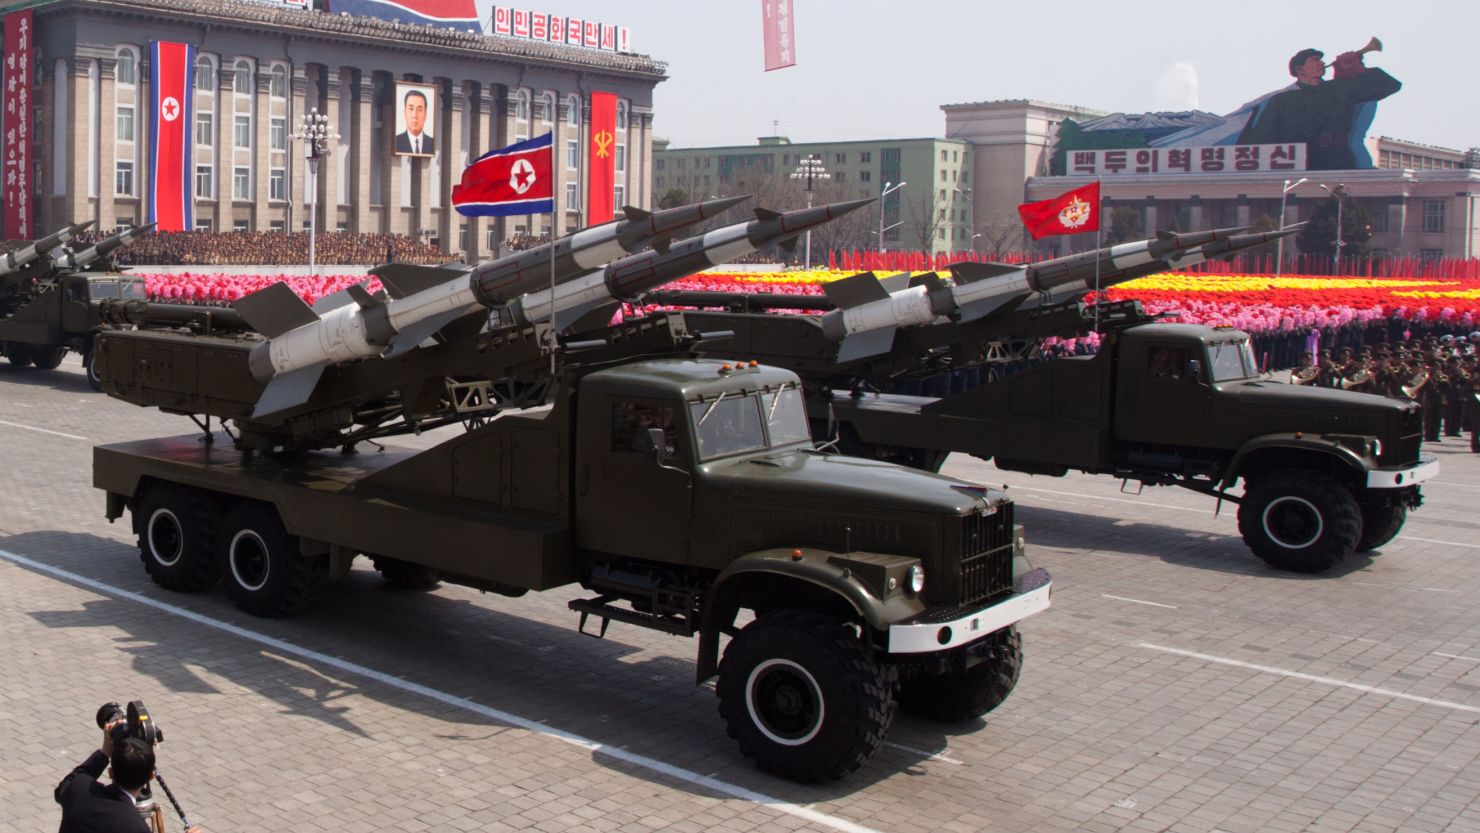 SA-3 ground-to-air missiles are displayed during a parade in 2012.